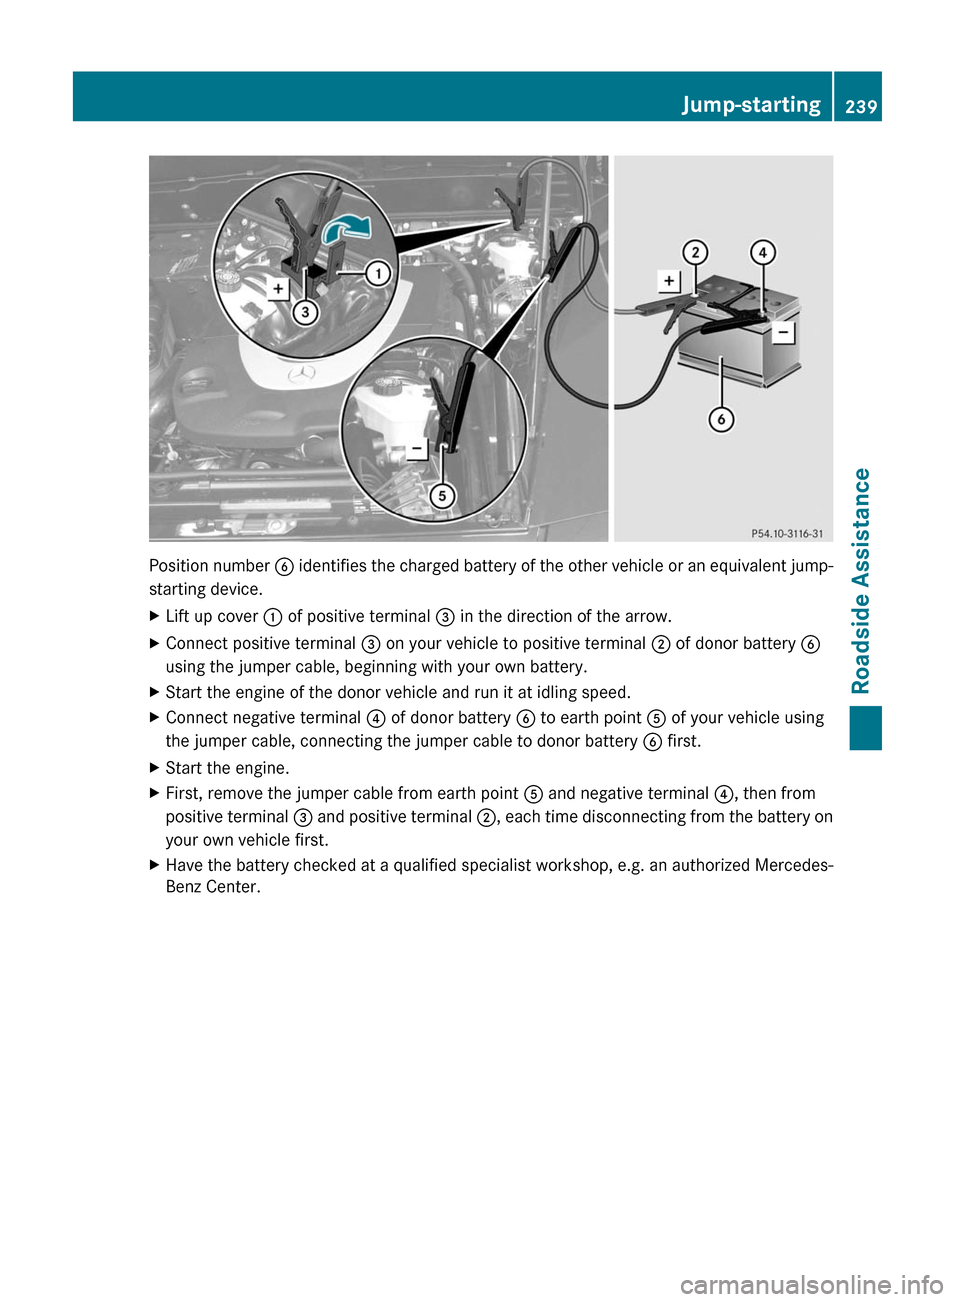 MERCEDES-BENZ G550 2011 W463 Owners Manual Position number B identifies the charged battery of the other vehicle or an equivalent jump-
starting device.
XLift up cover  : of positive terminal  = in the direction of the arrow.XConnect positive 